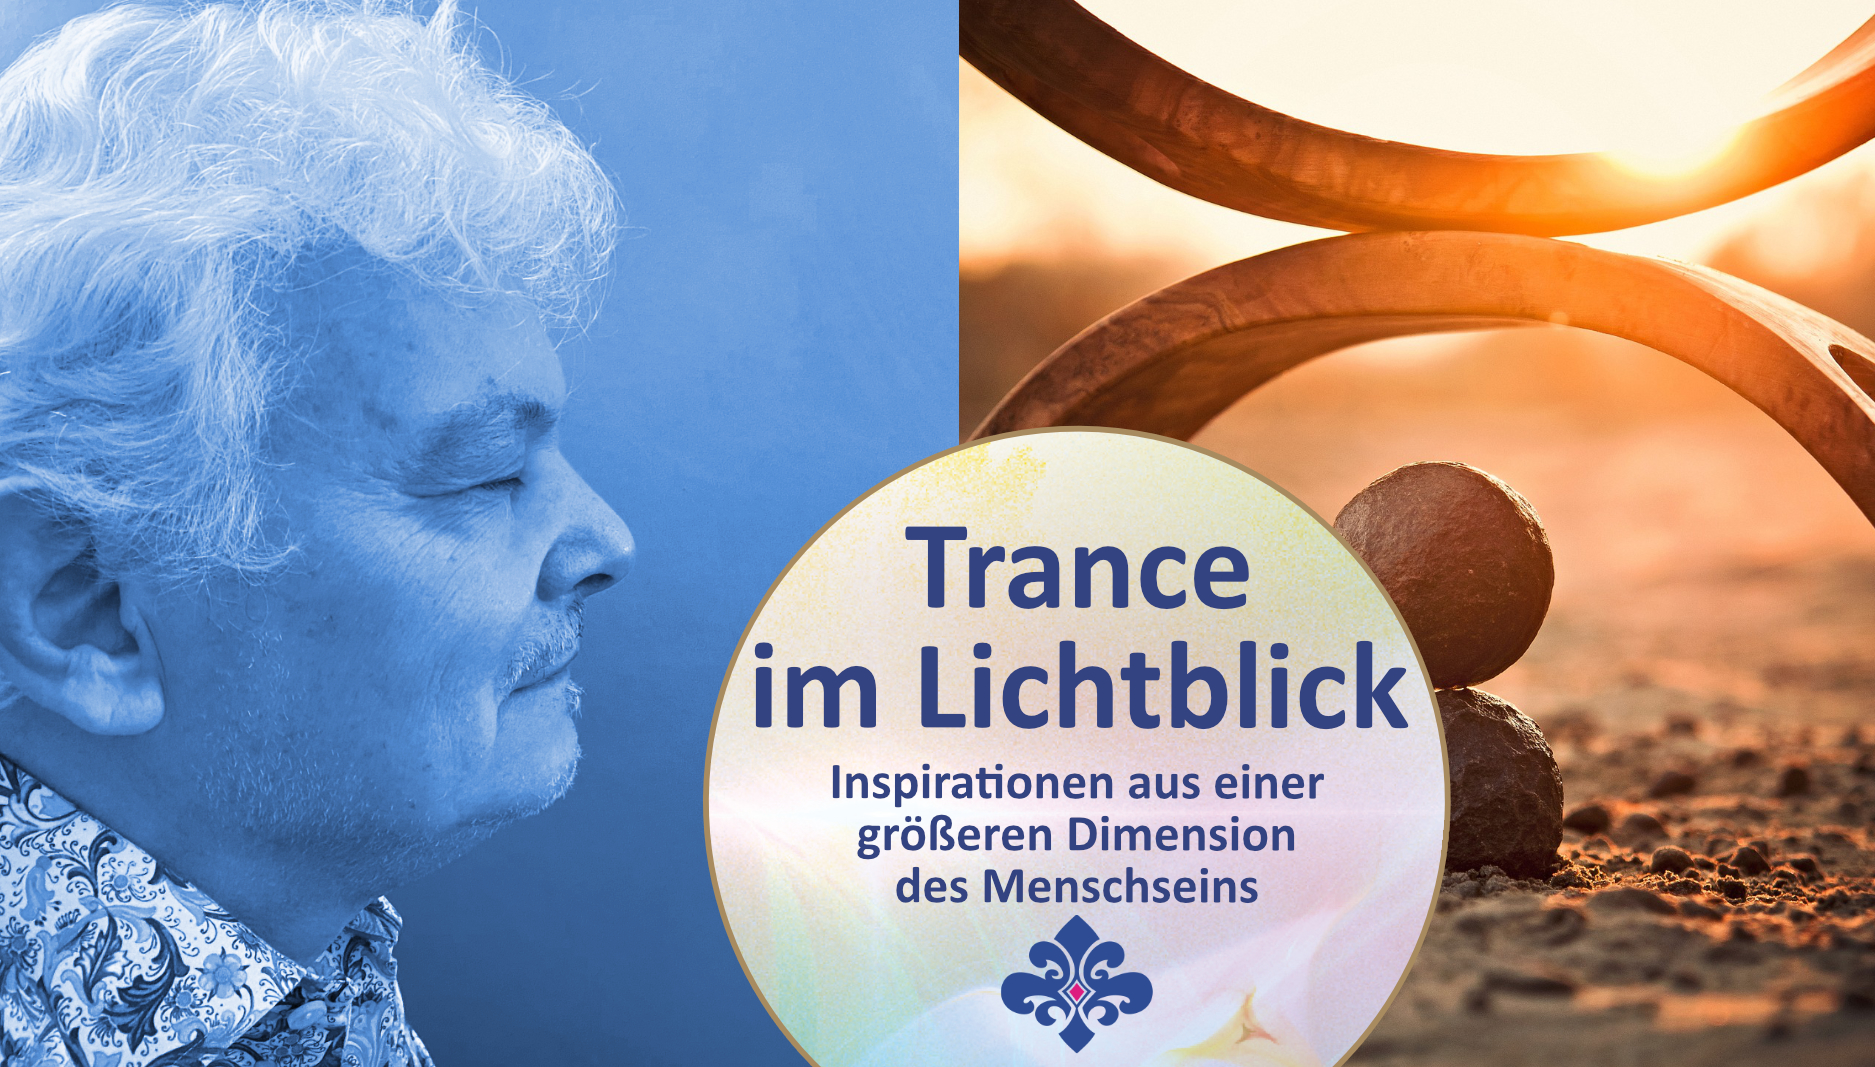 Thomas in Trance - Inspirations-Abend im Lichtblick